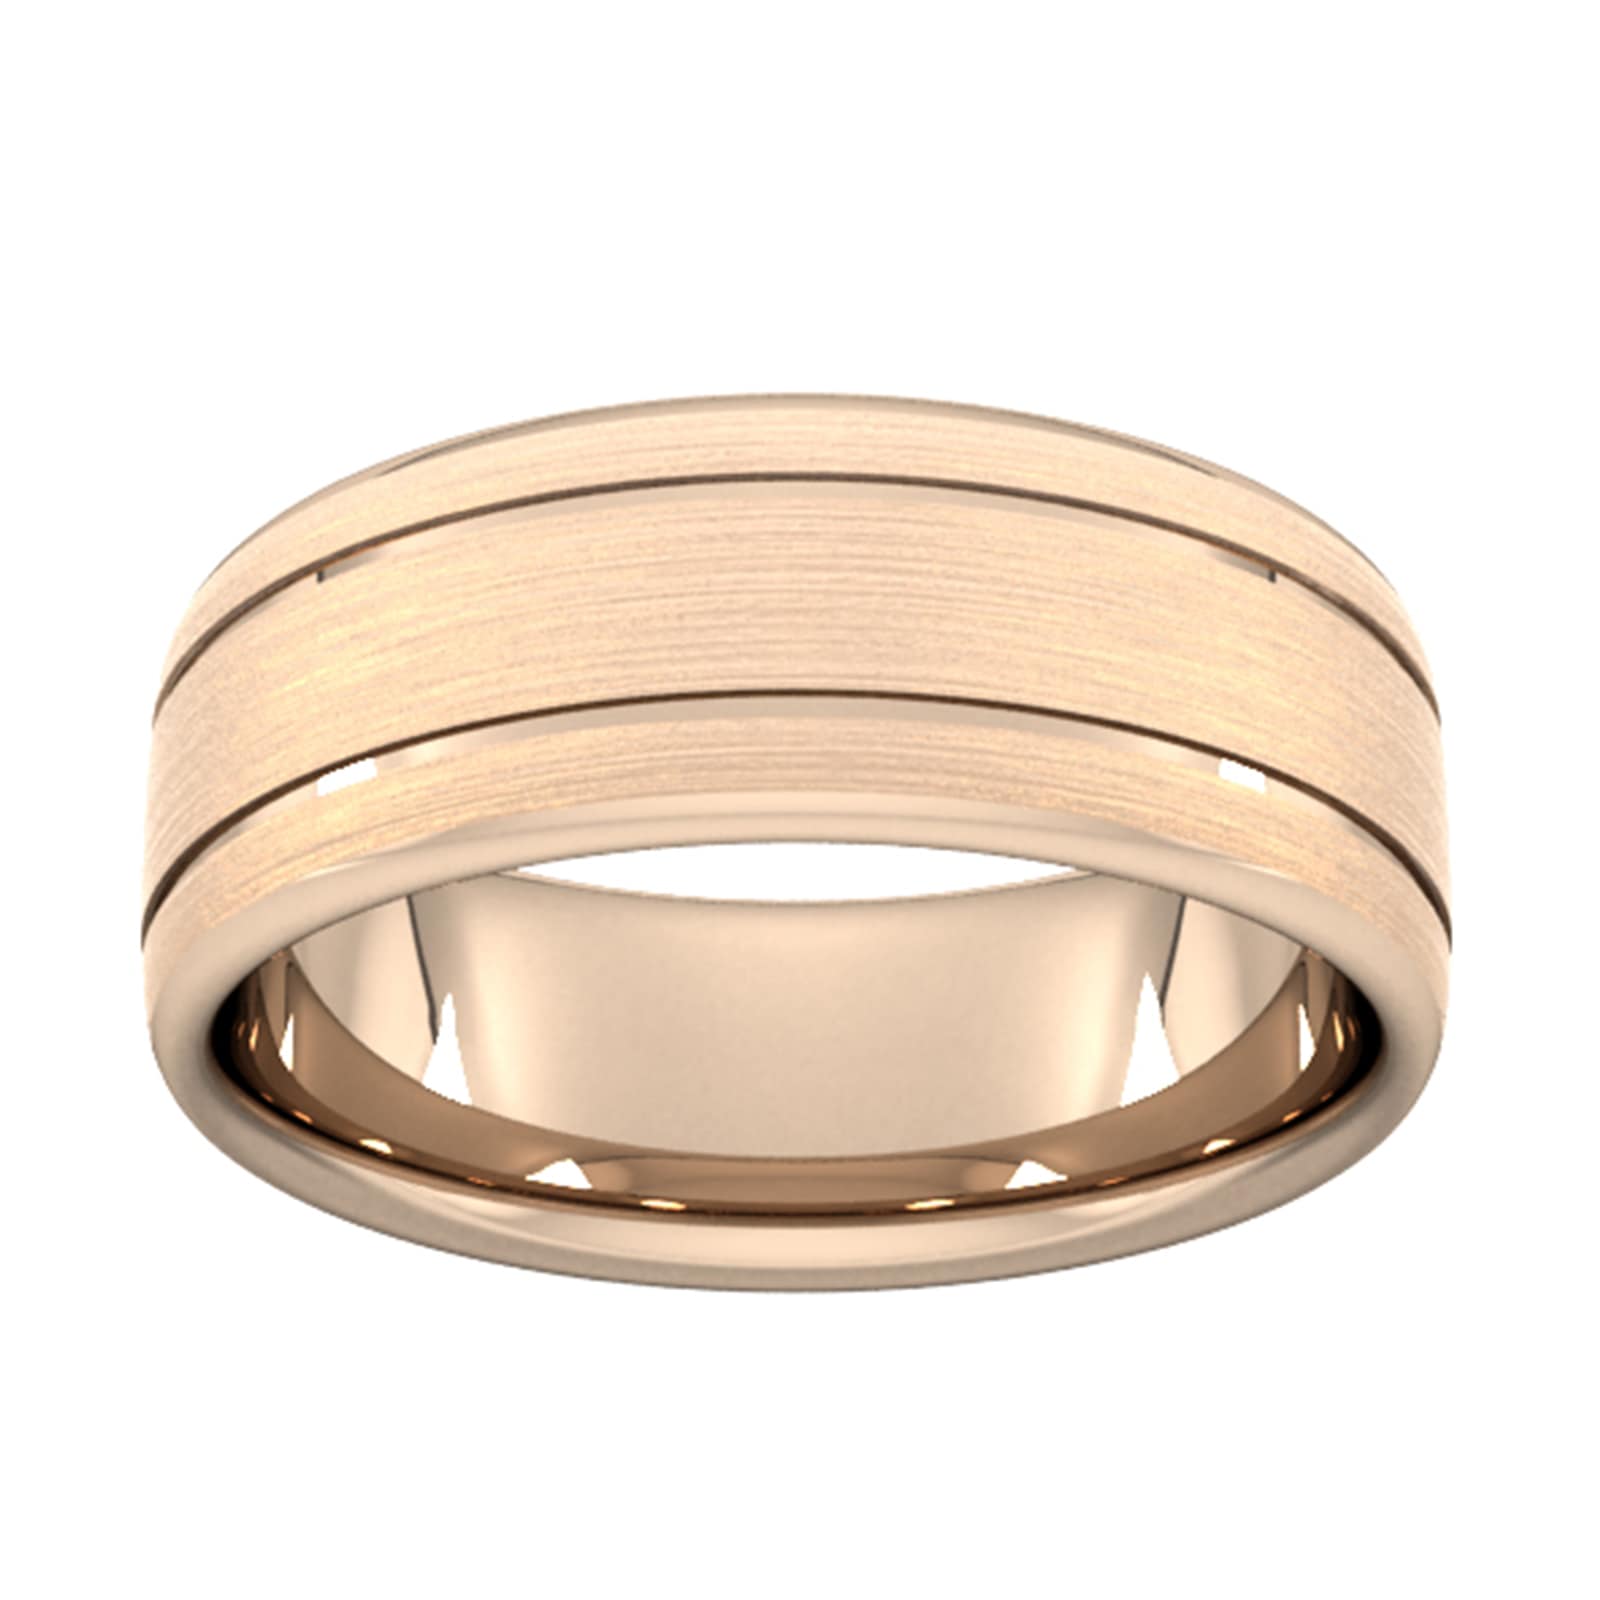 8mm Traditional Court Heavy Matt Finish With Double Grooves Wedding Ring In 18 Carat Rose Gold - Ring Size U